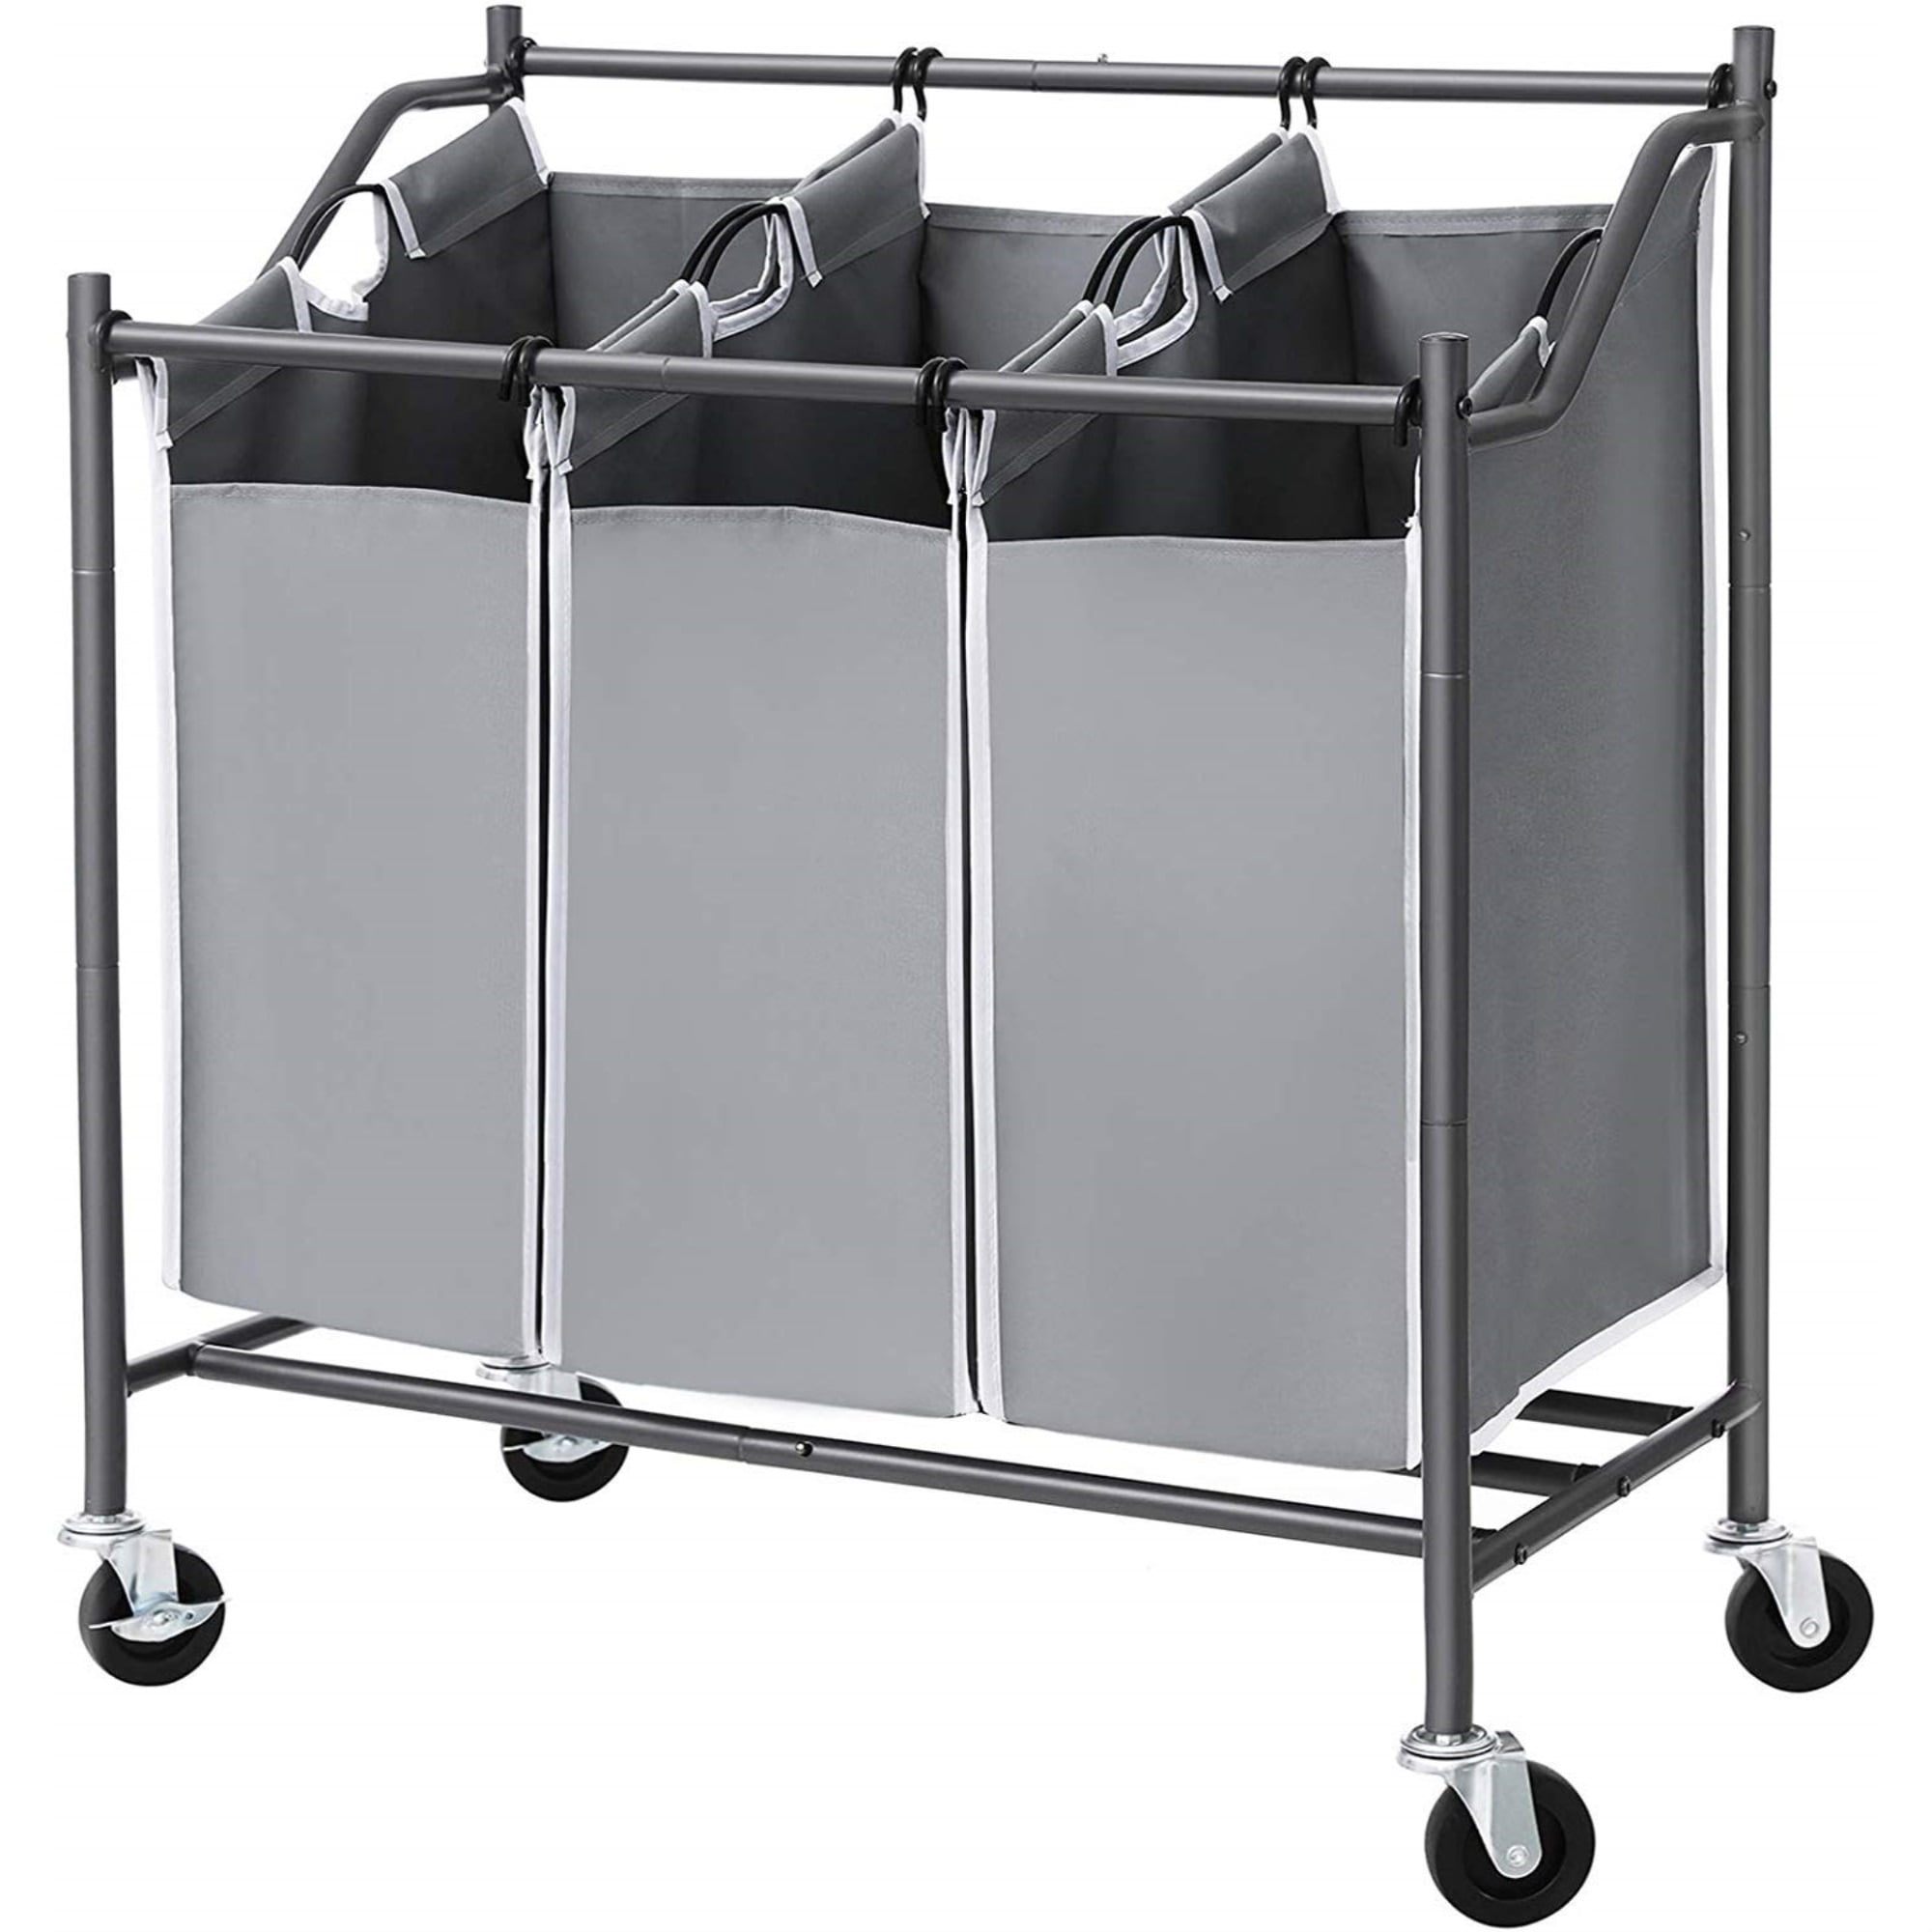 3 bags with casters Metal Rolling Laundry Hamper 